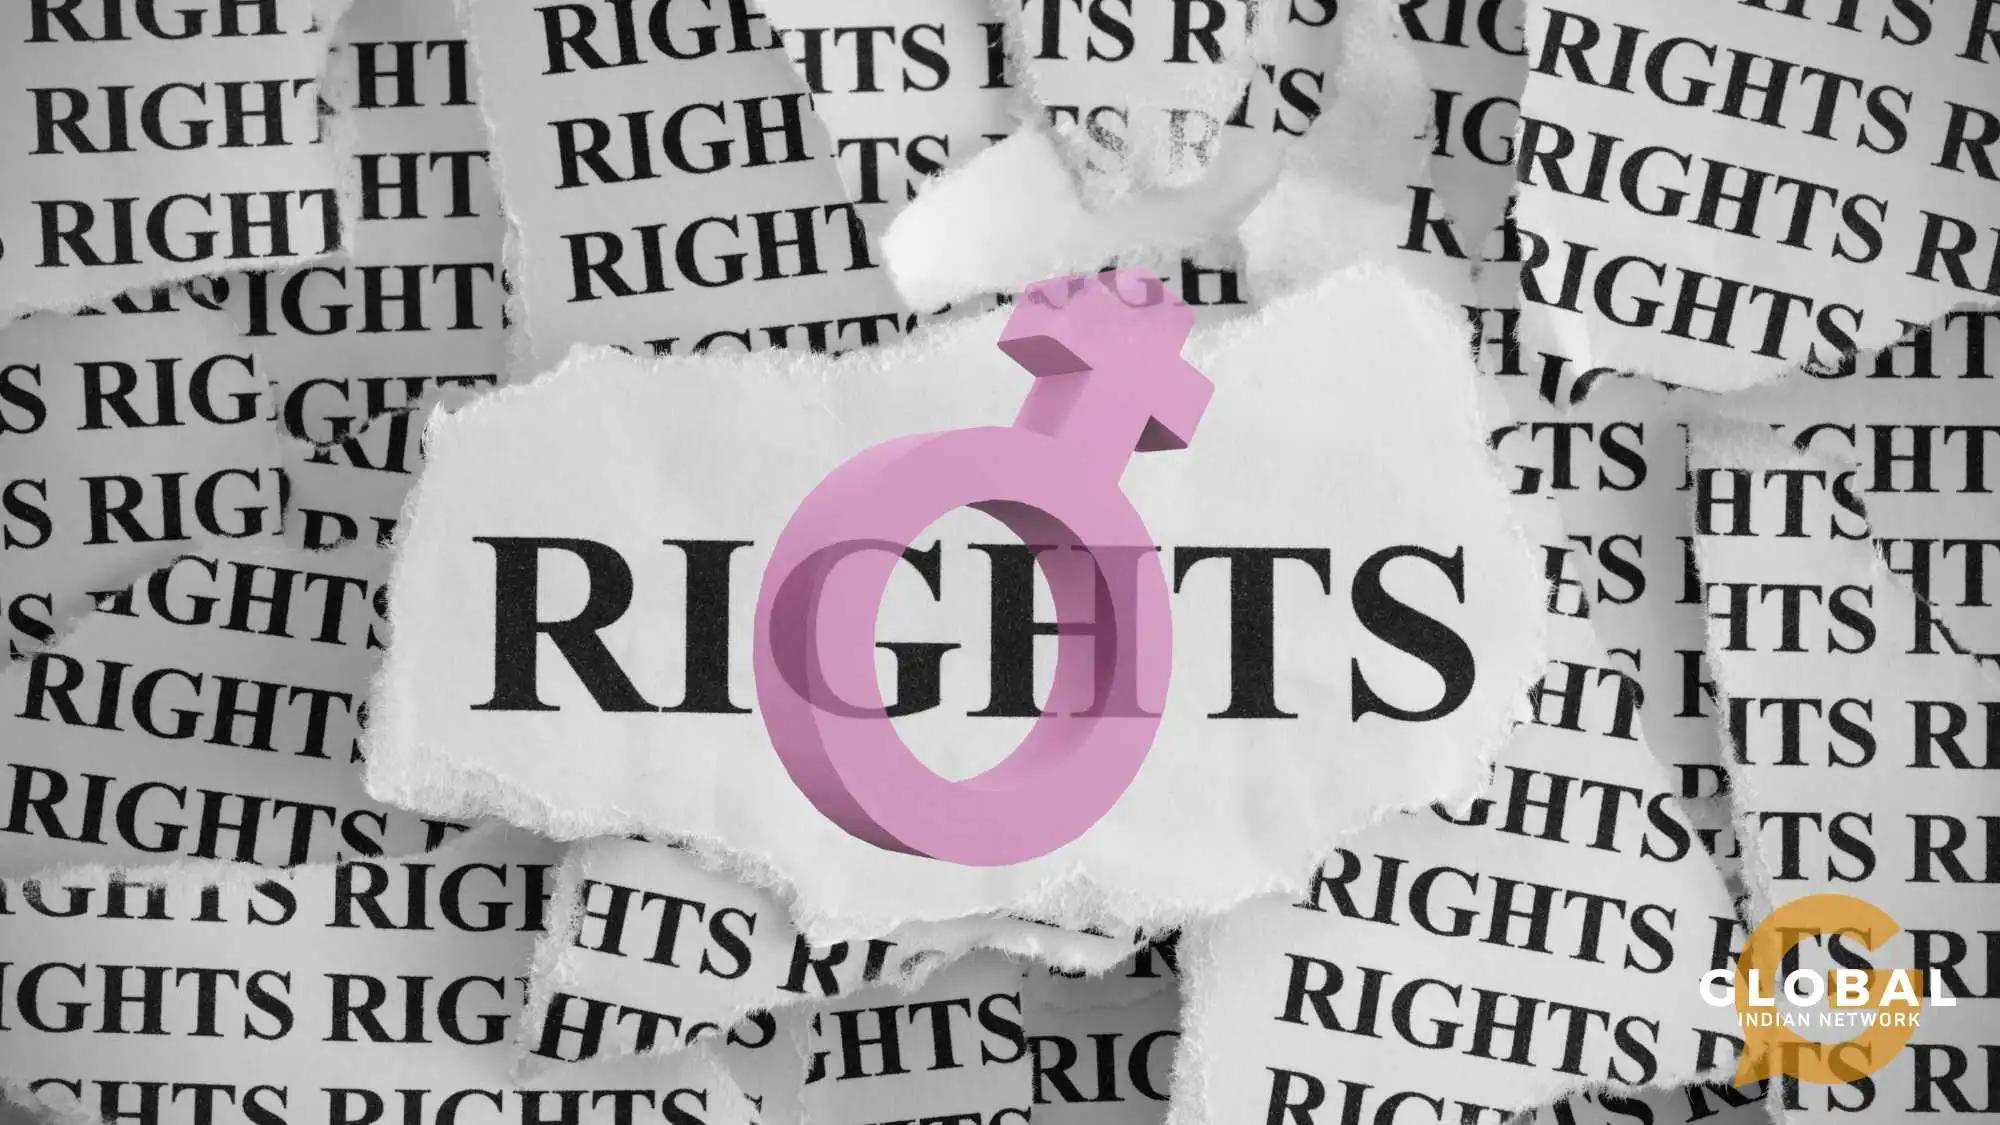 laws related to women's rights in india